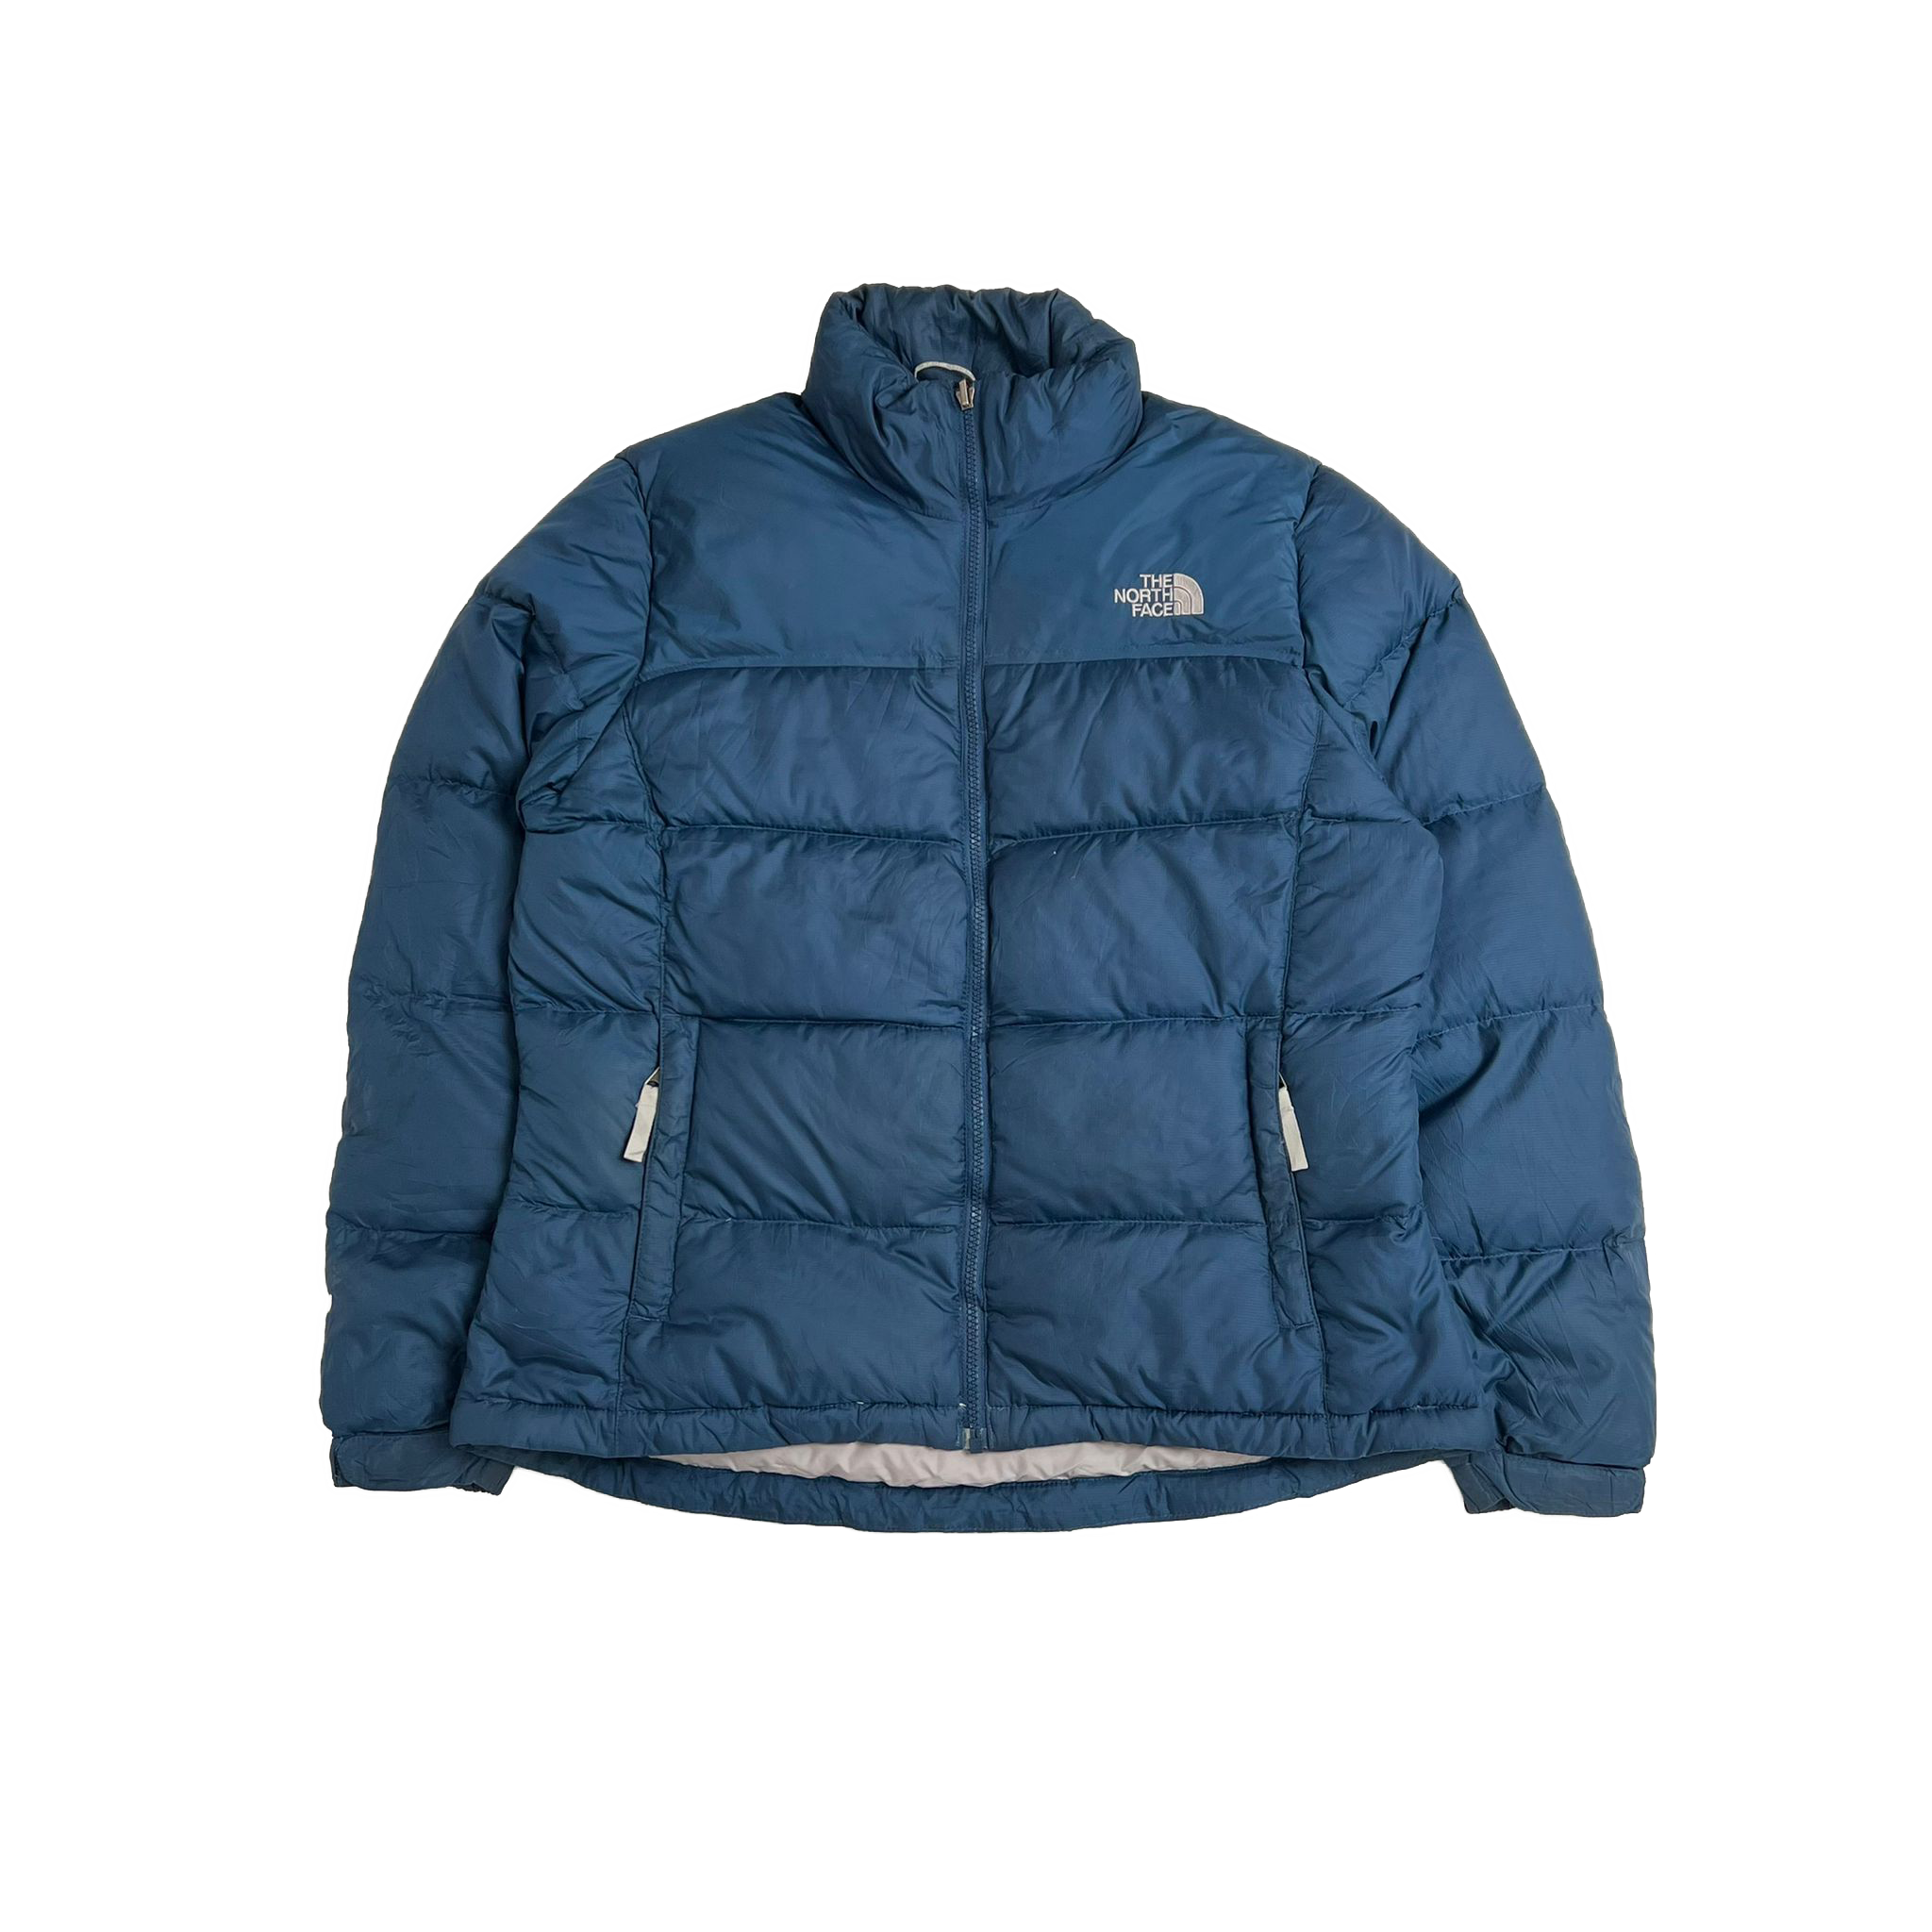 Women's The North Face 700 puffer